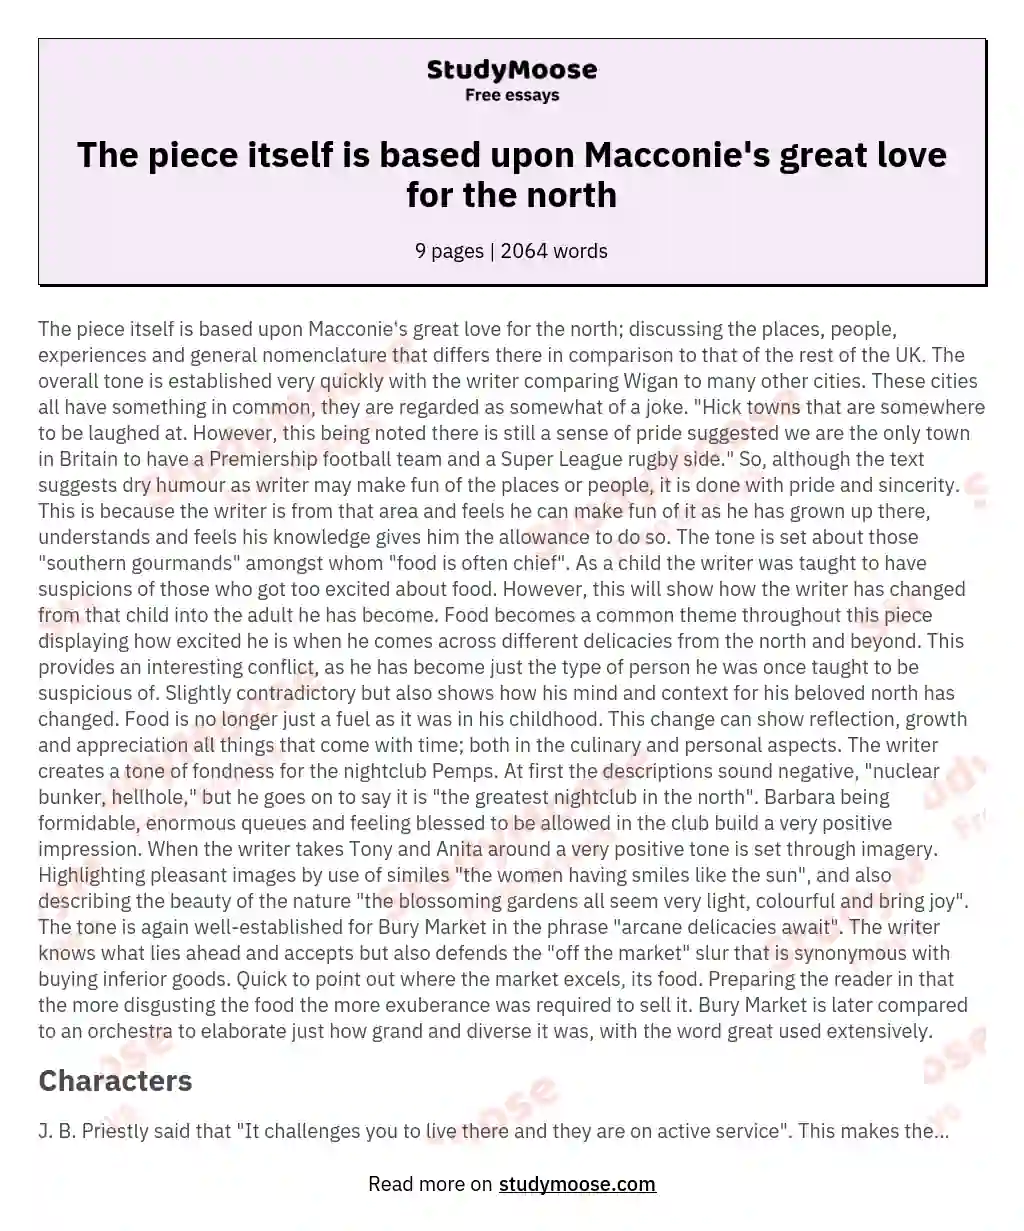 The piece itself is based upon Macconie's great love for the north essay